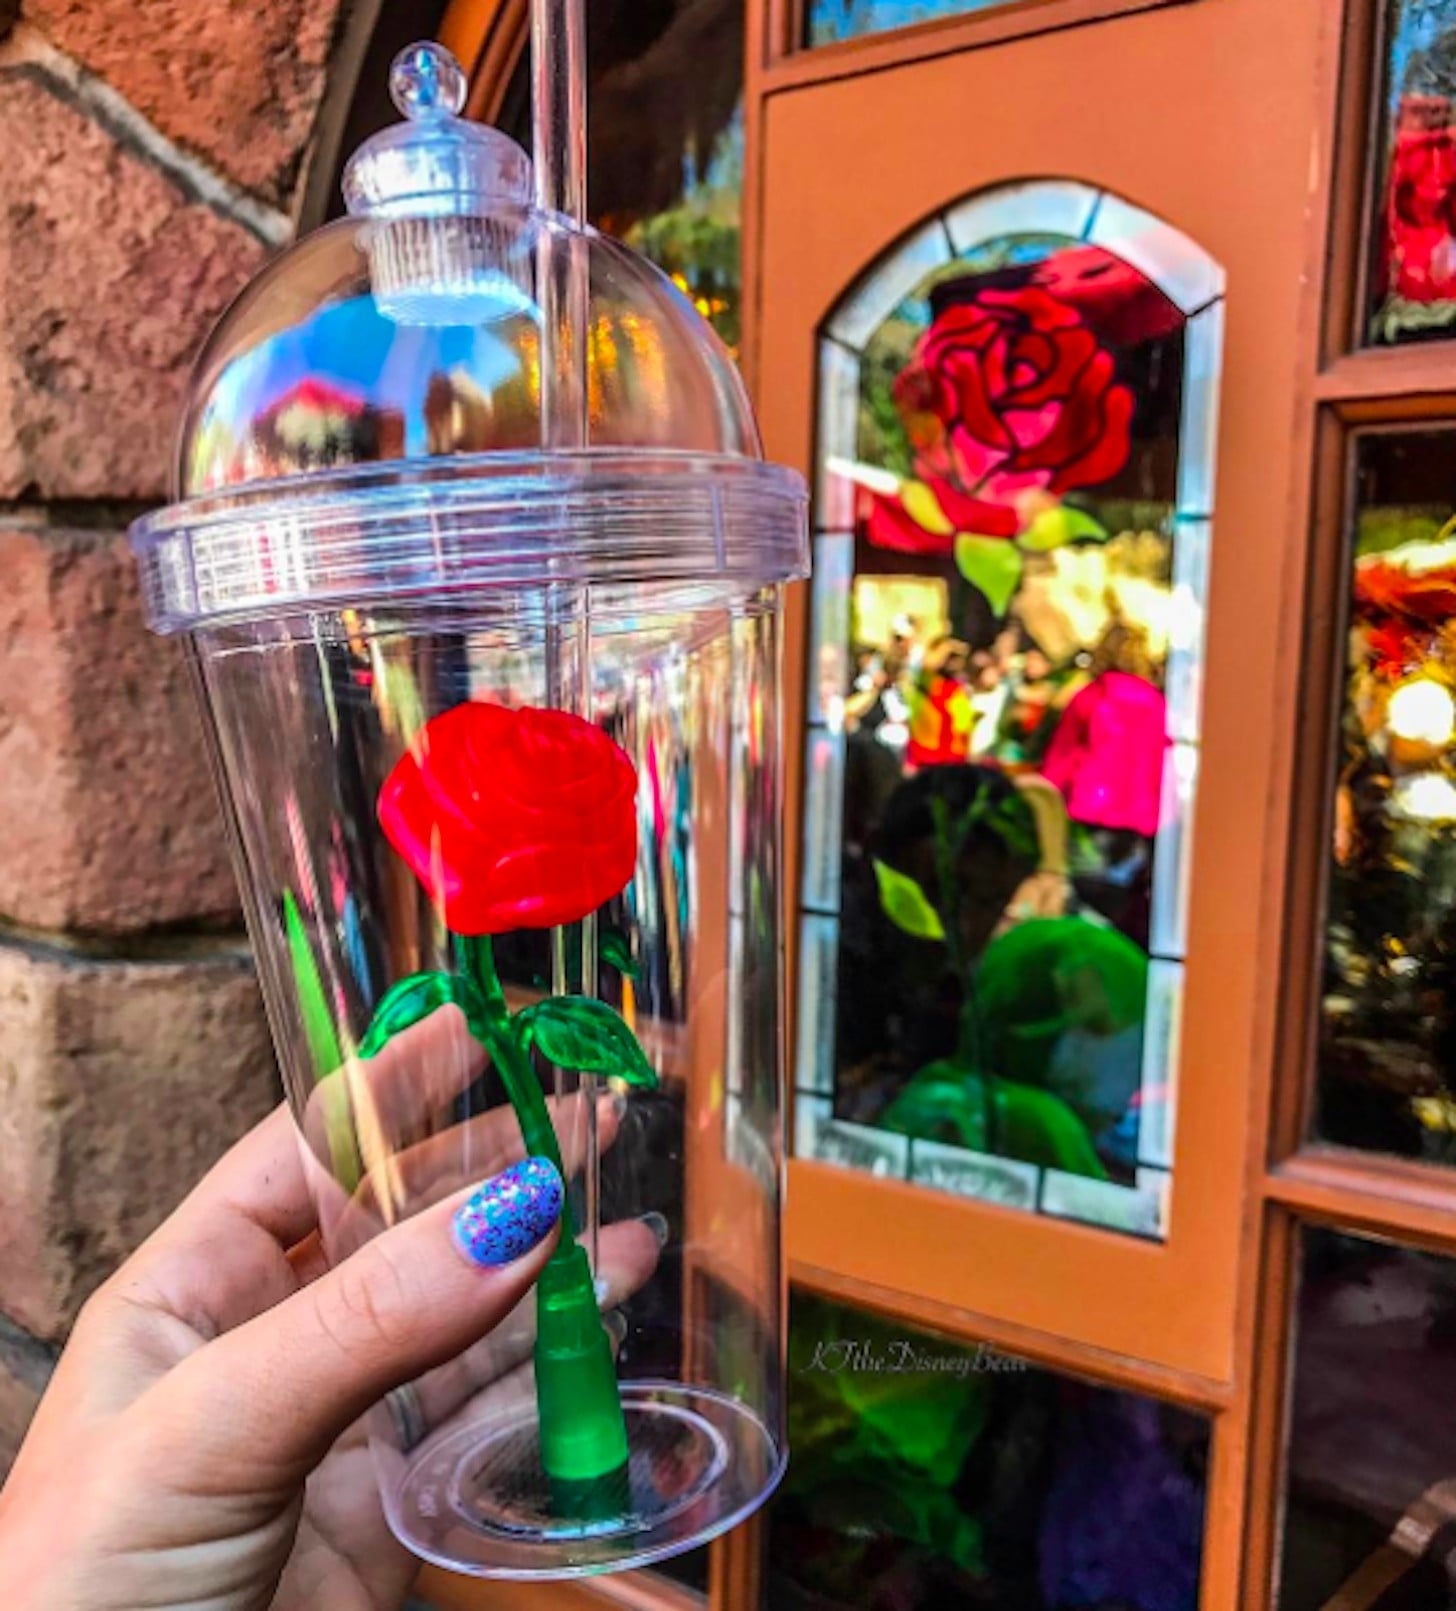 Disney Drink Tumbler Cup - Light Up Beauty and the Beast Rose